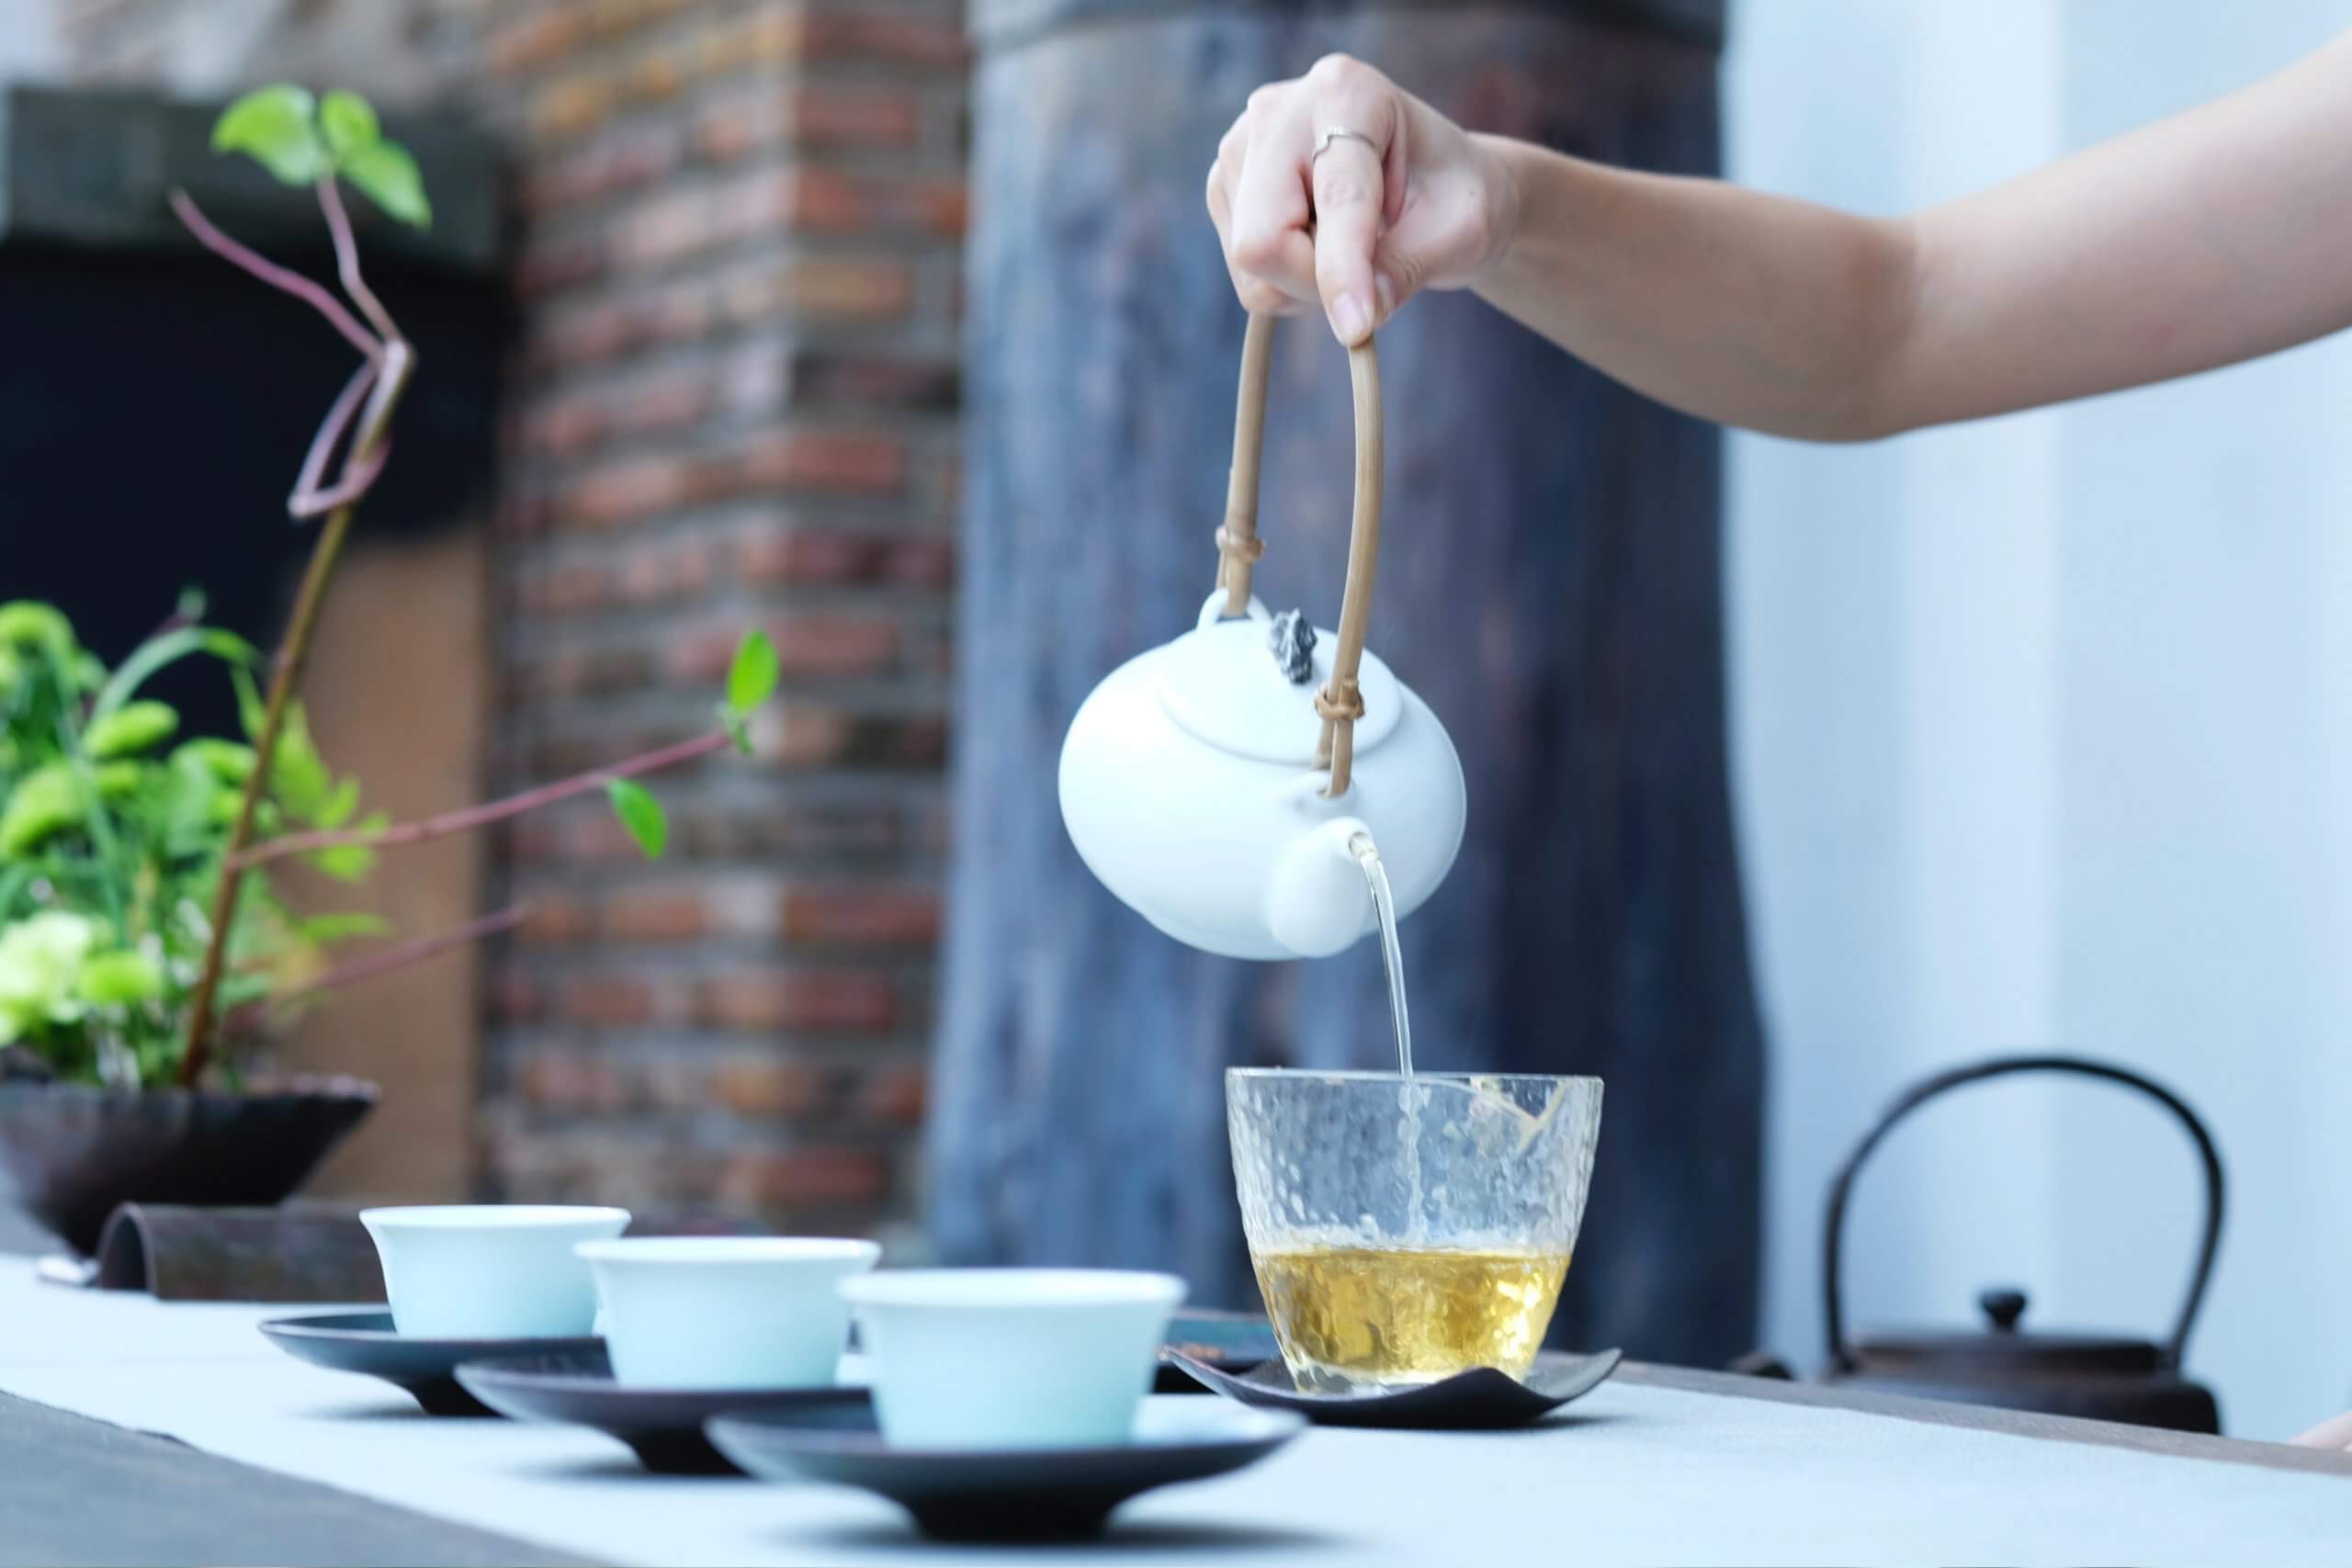 Pouring Tea | The Mustcard